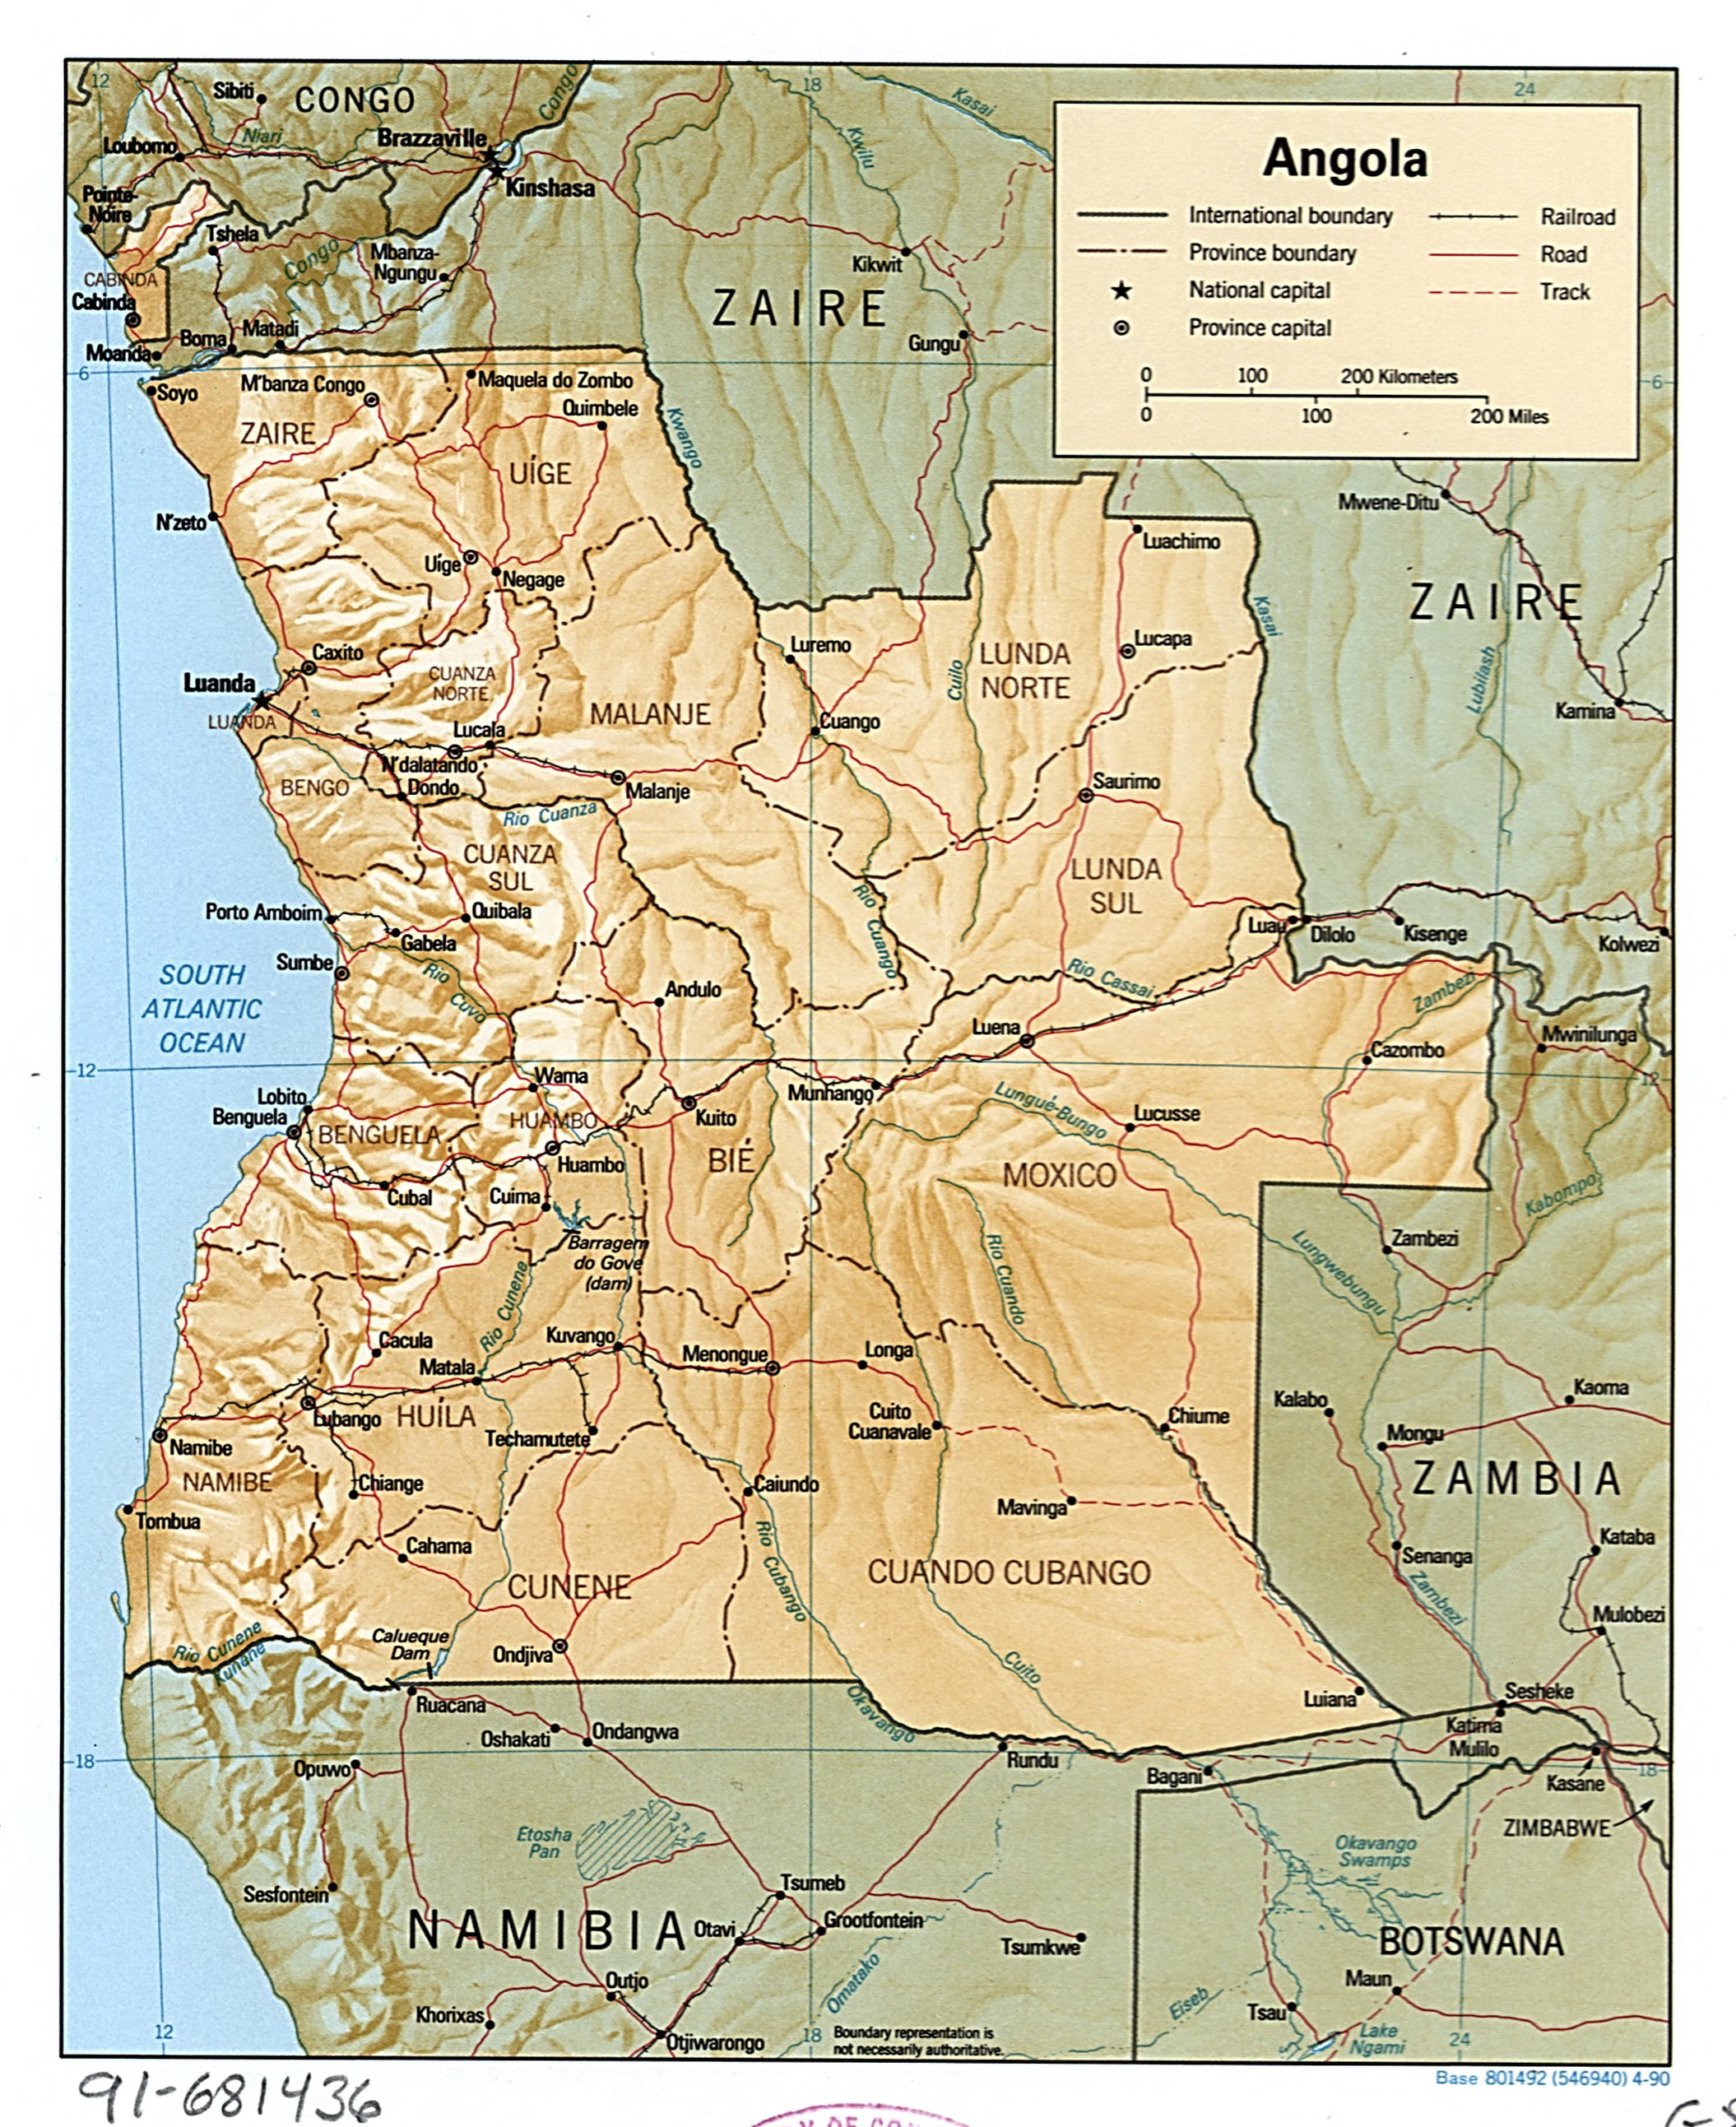 Large Detailed Political And Administrative Map Of Angola With Relief Roads Railroads And